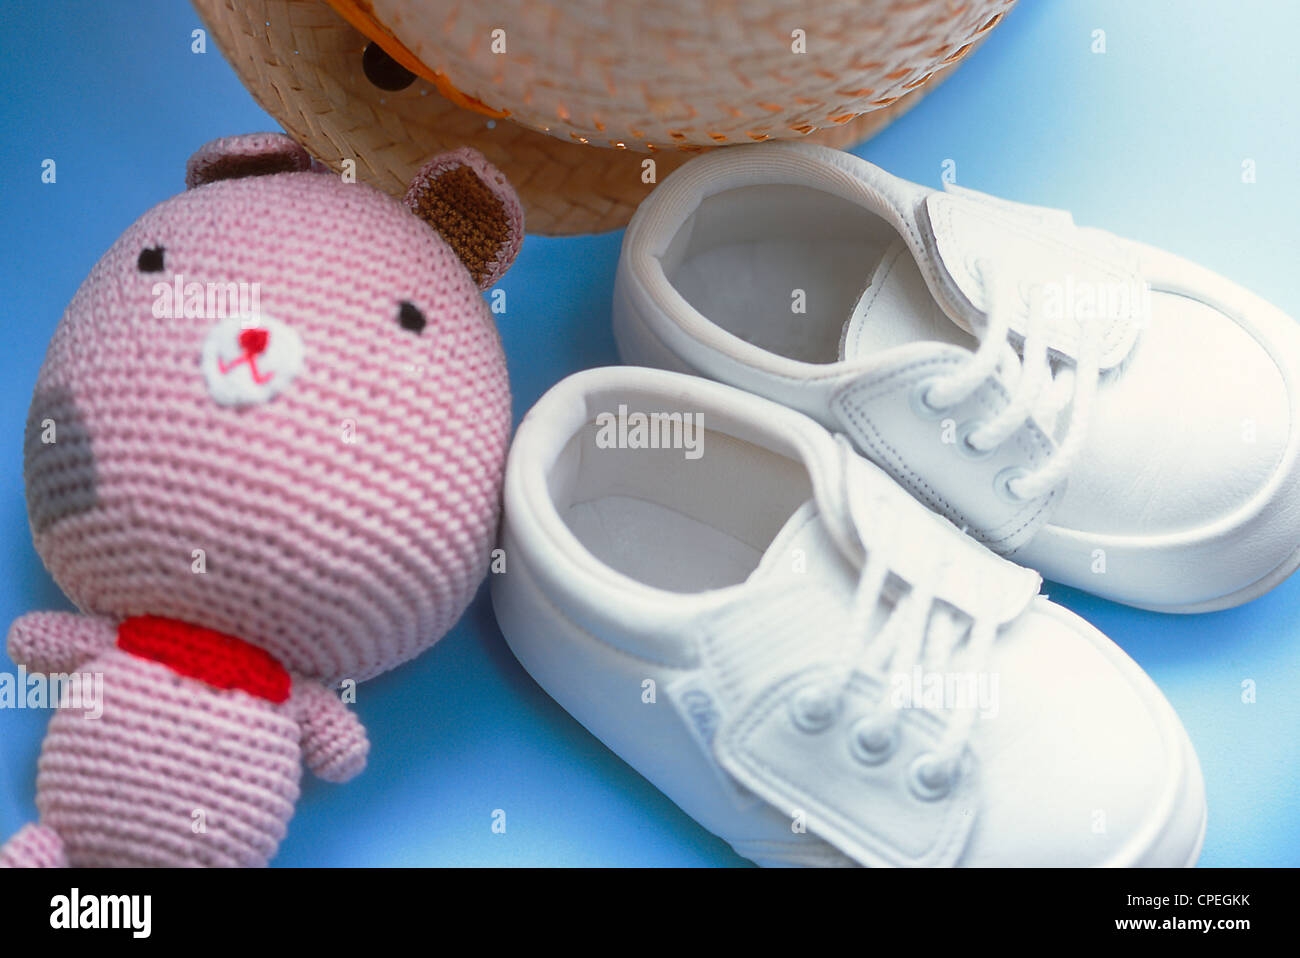 Baby Shoes, Toy And Hat On Chair Stock Photo